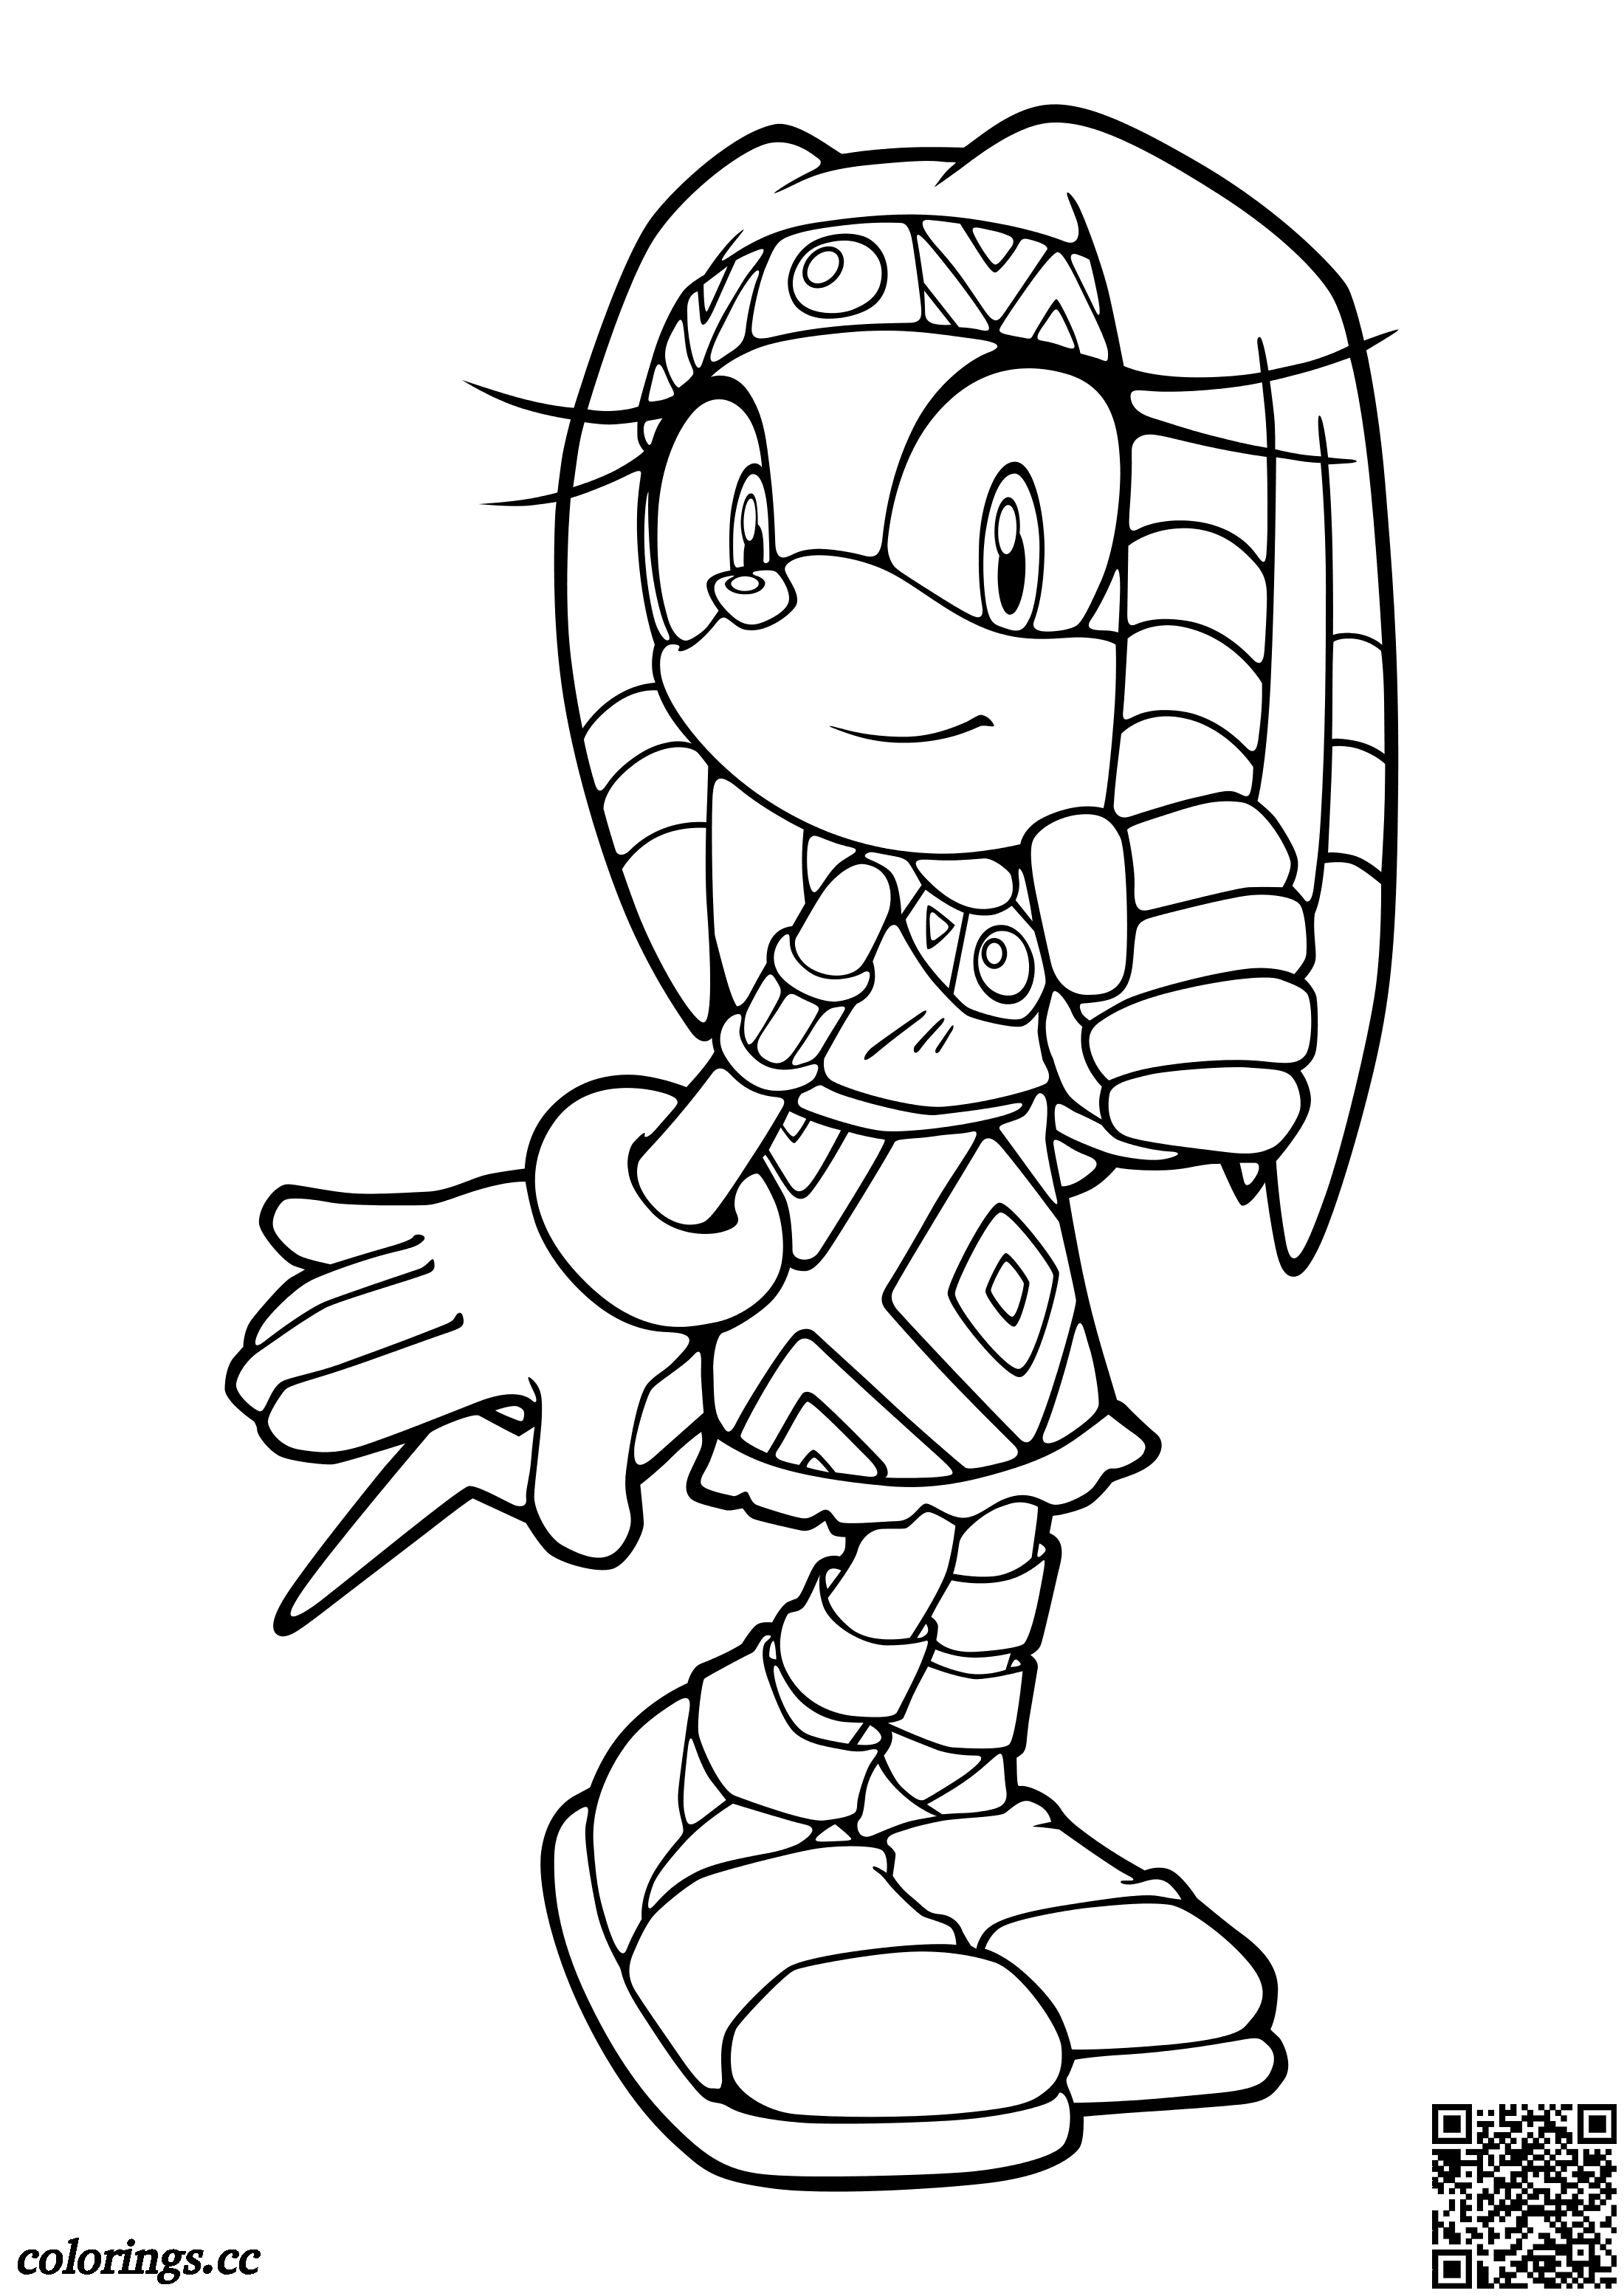 tikal the echidna coloring pages sonic the hedgehog coloring pages colorings cc